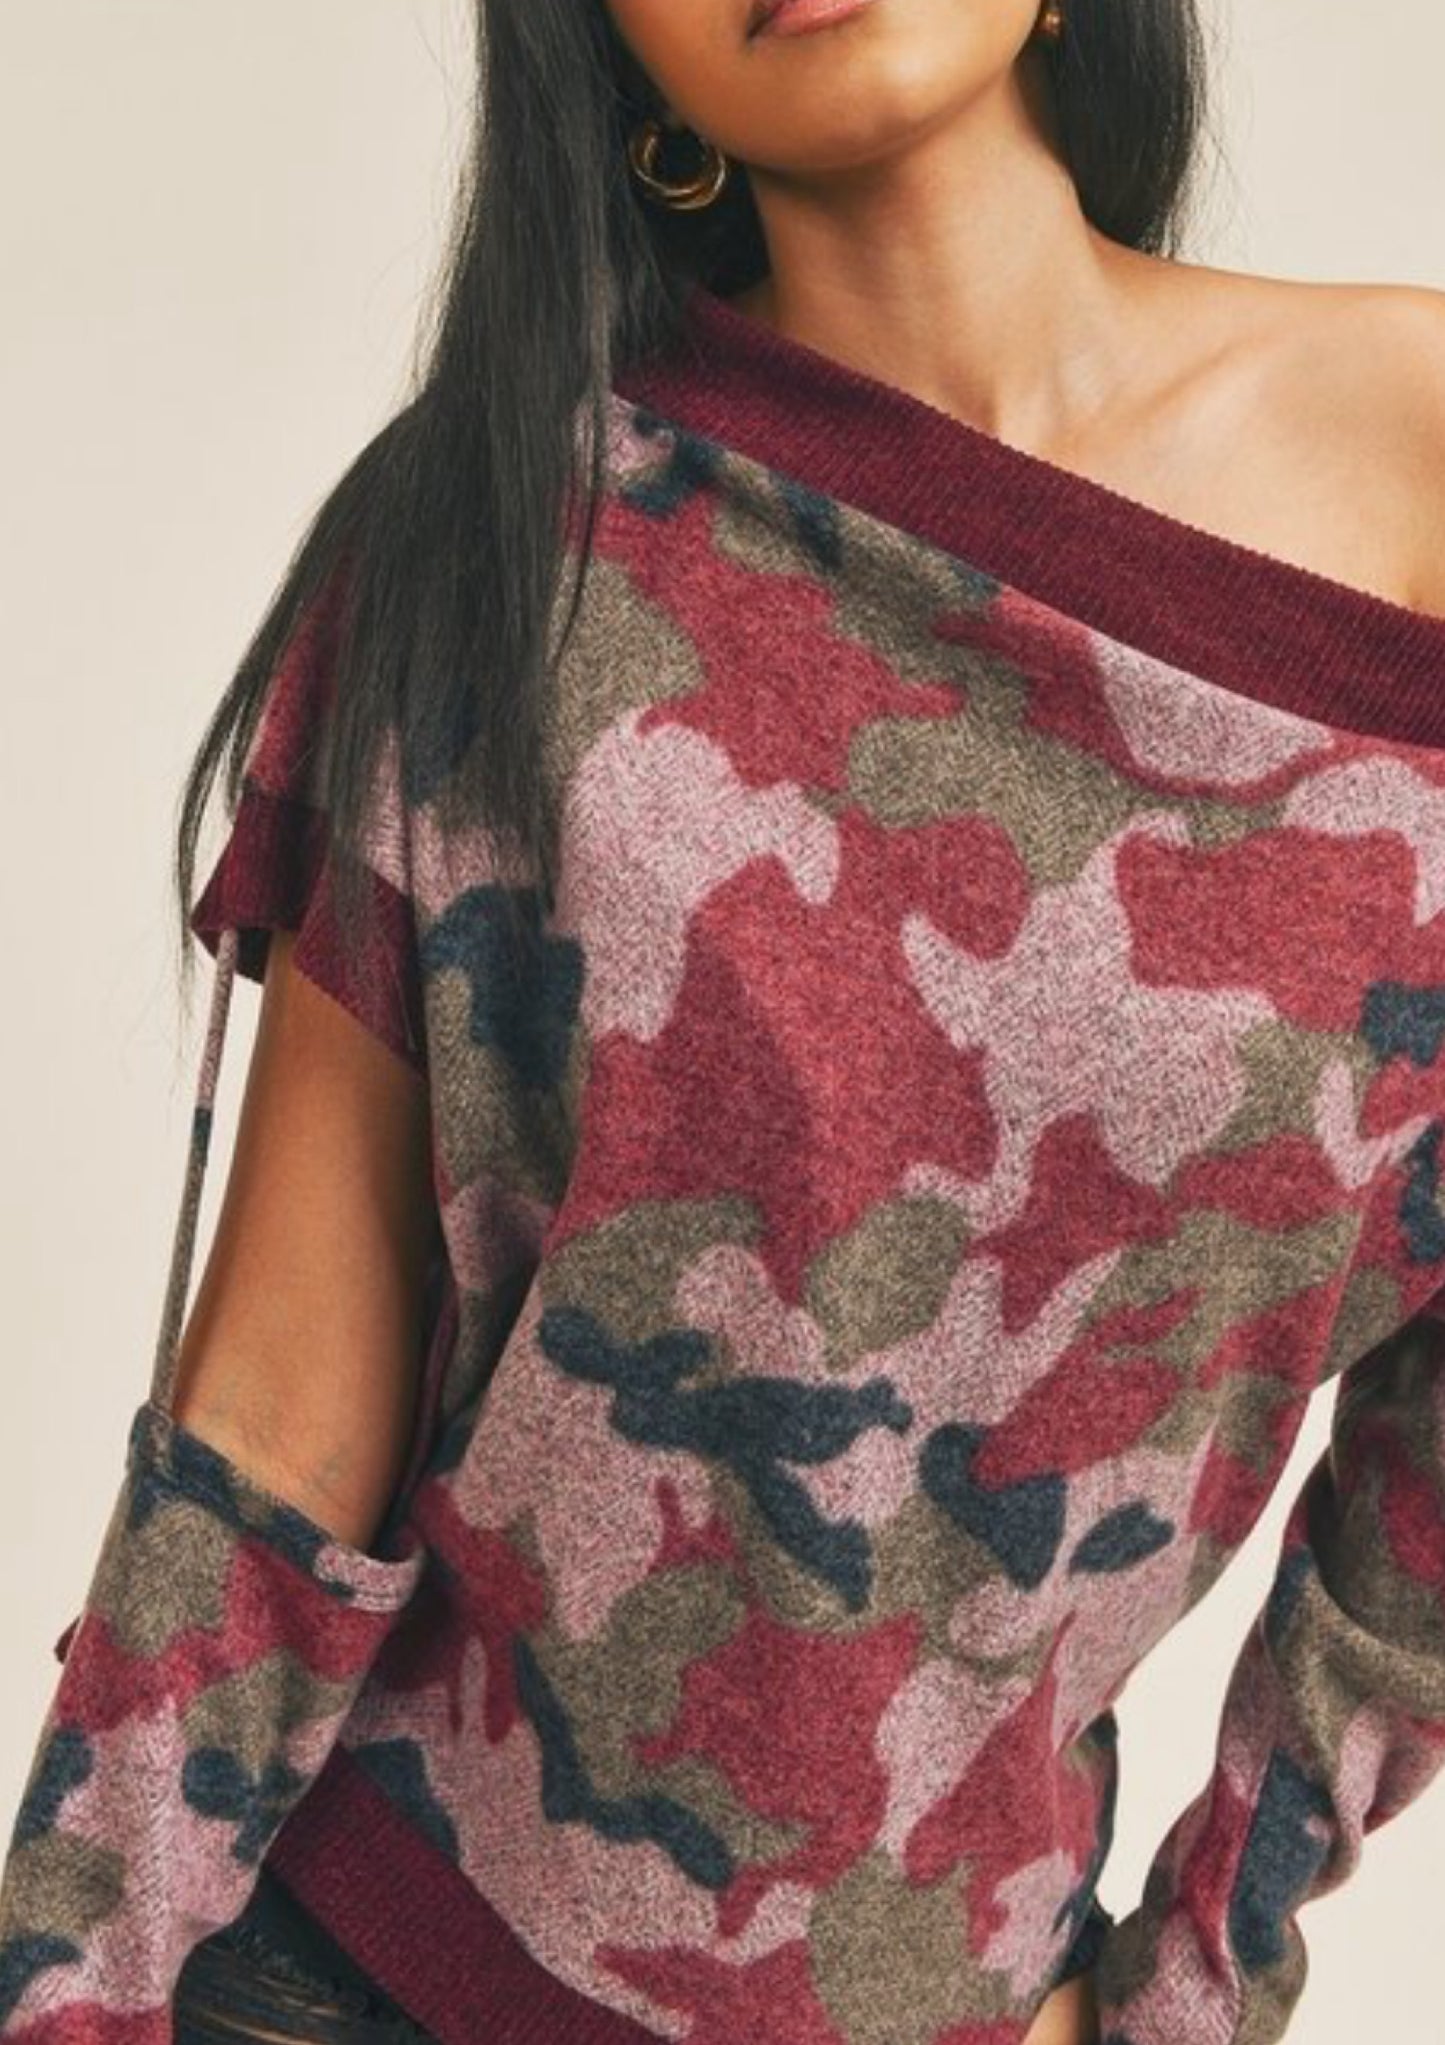 Showing out in Camouflage cut-out Sweater ( more colors)